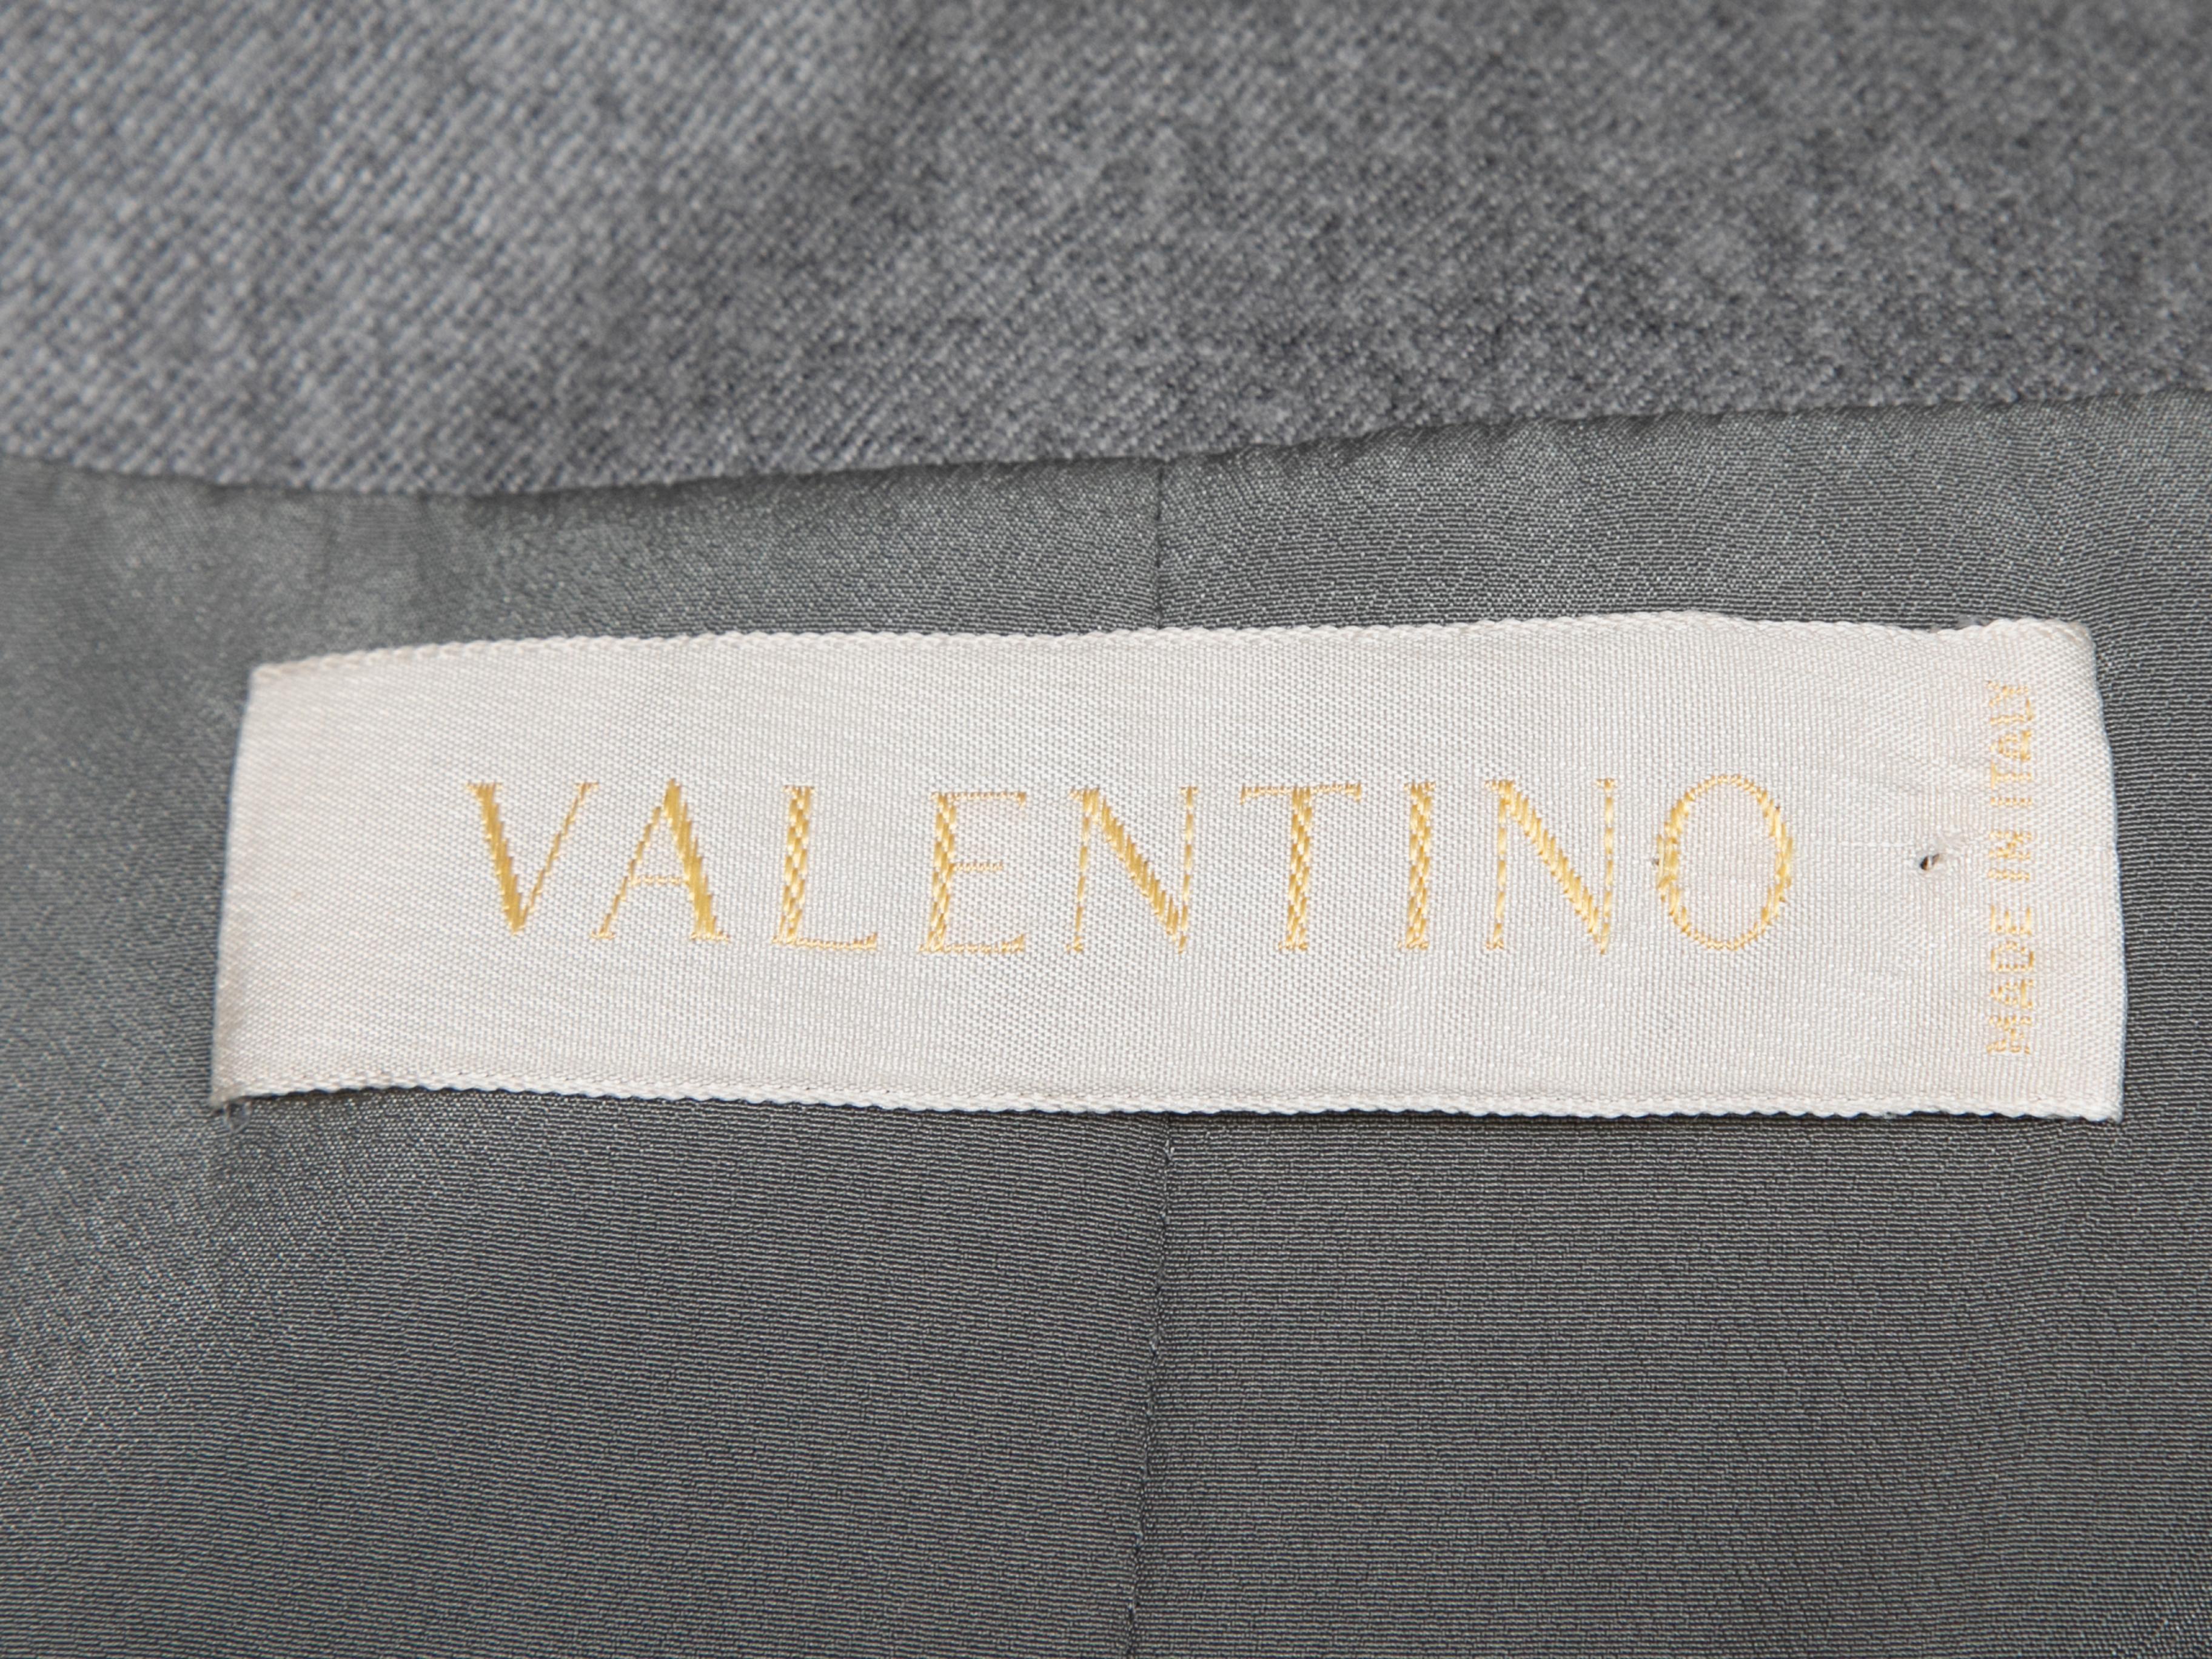 Vintage grey wool and cashmere jacket by Valentino. Rhinestone embellishment trim. V-neck. Zip closure at center front. 36